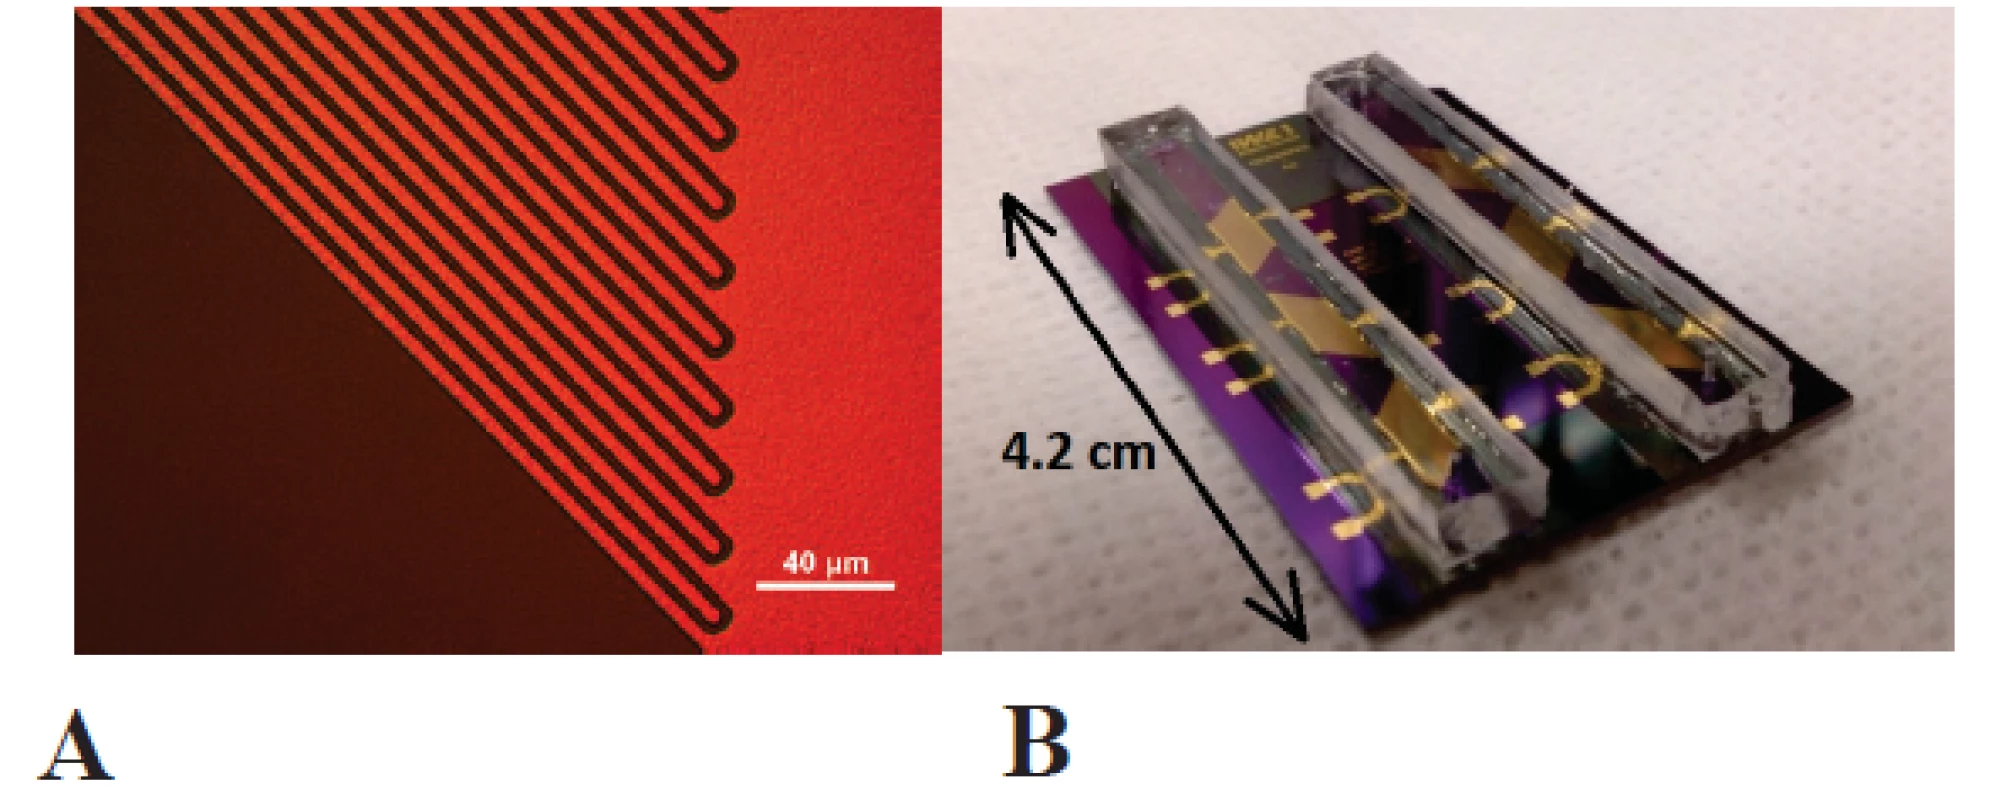 &lt;b&gt;A&lt;/b&gt; Gold interdigital electrodes for electrical impedance spectroscopy. &lt;b&gt;B&lt;/b&gt; Microfluidic chip with six sensor areas in two microfluidic channels made of SU-8 photoresist with polydimethylsiloxane cover lids.